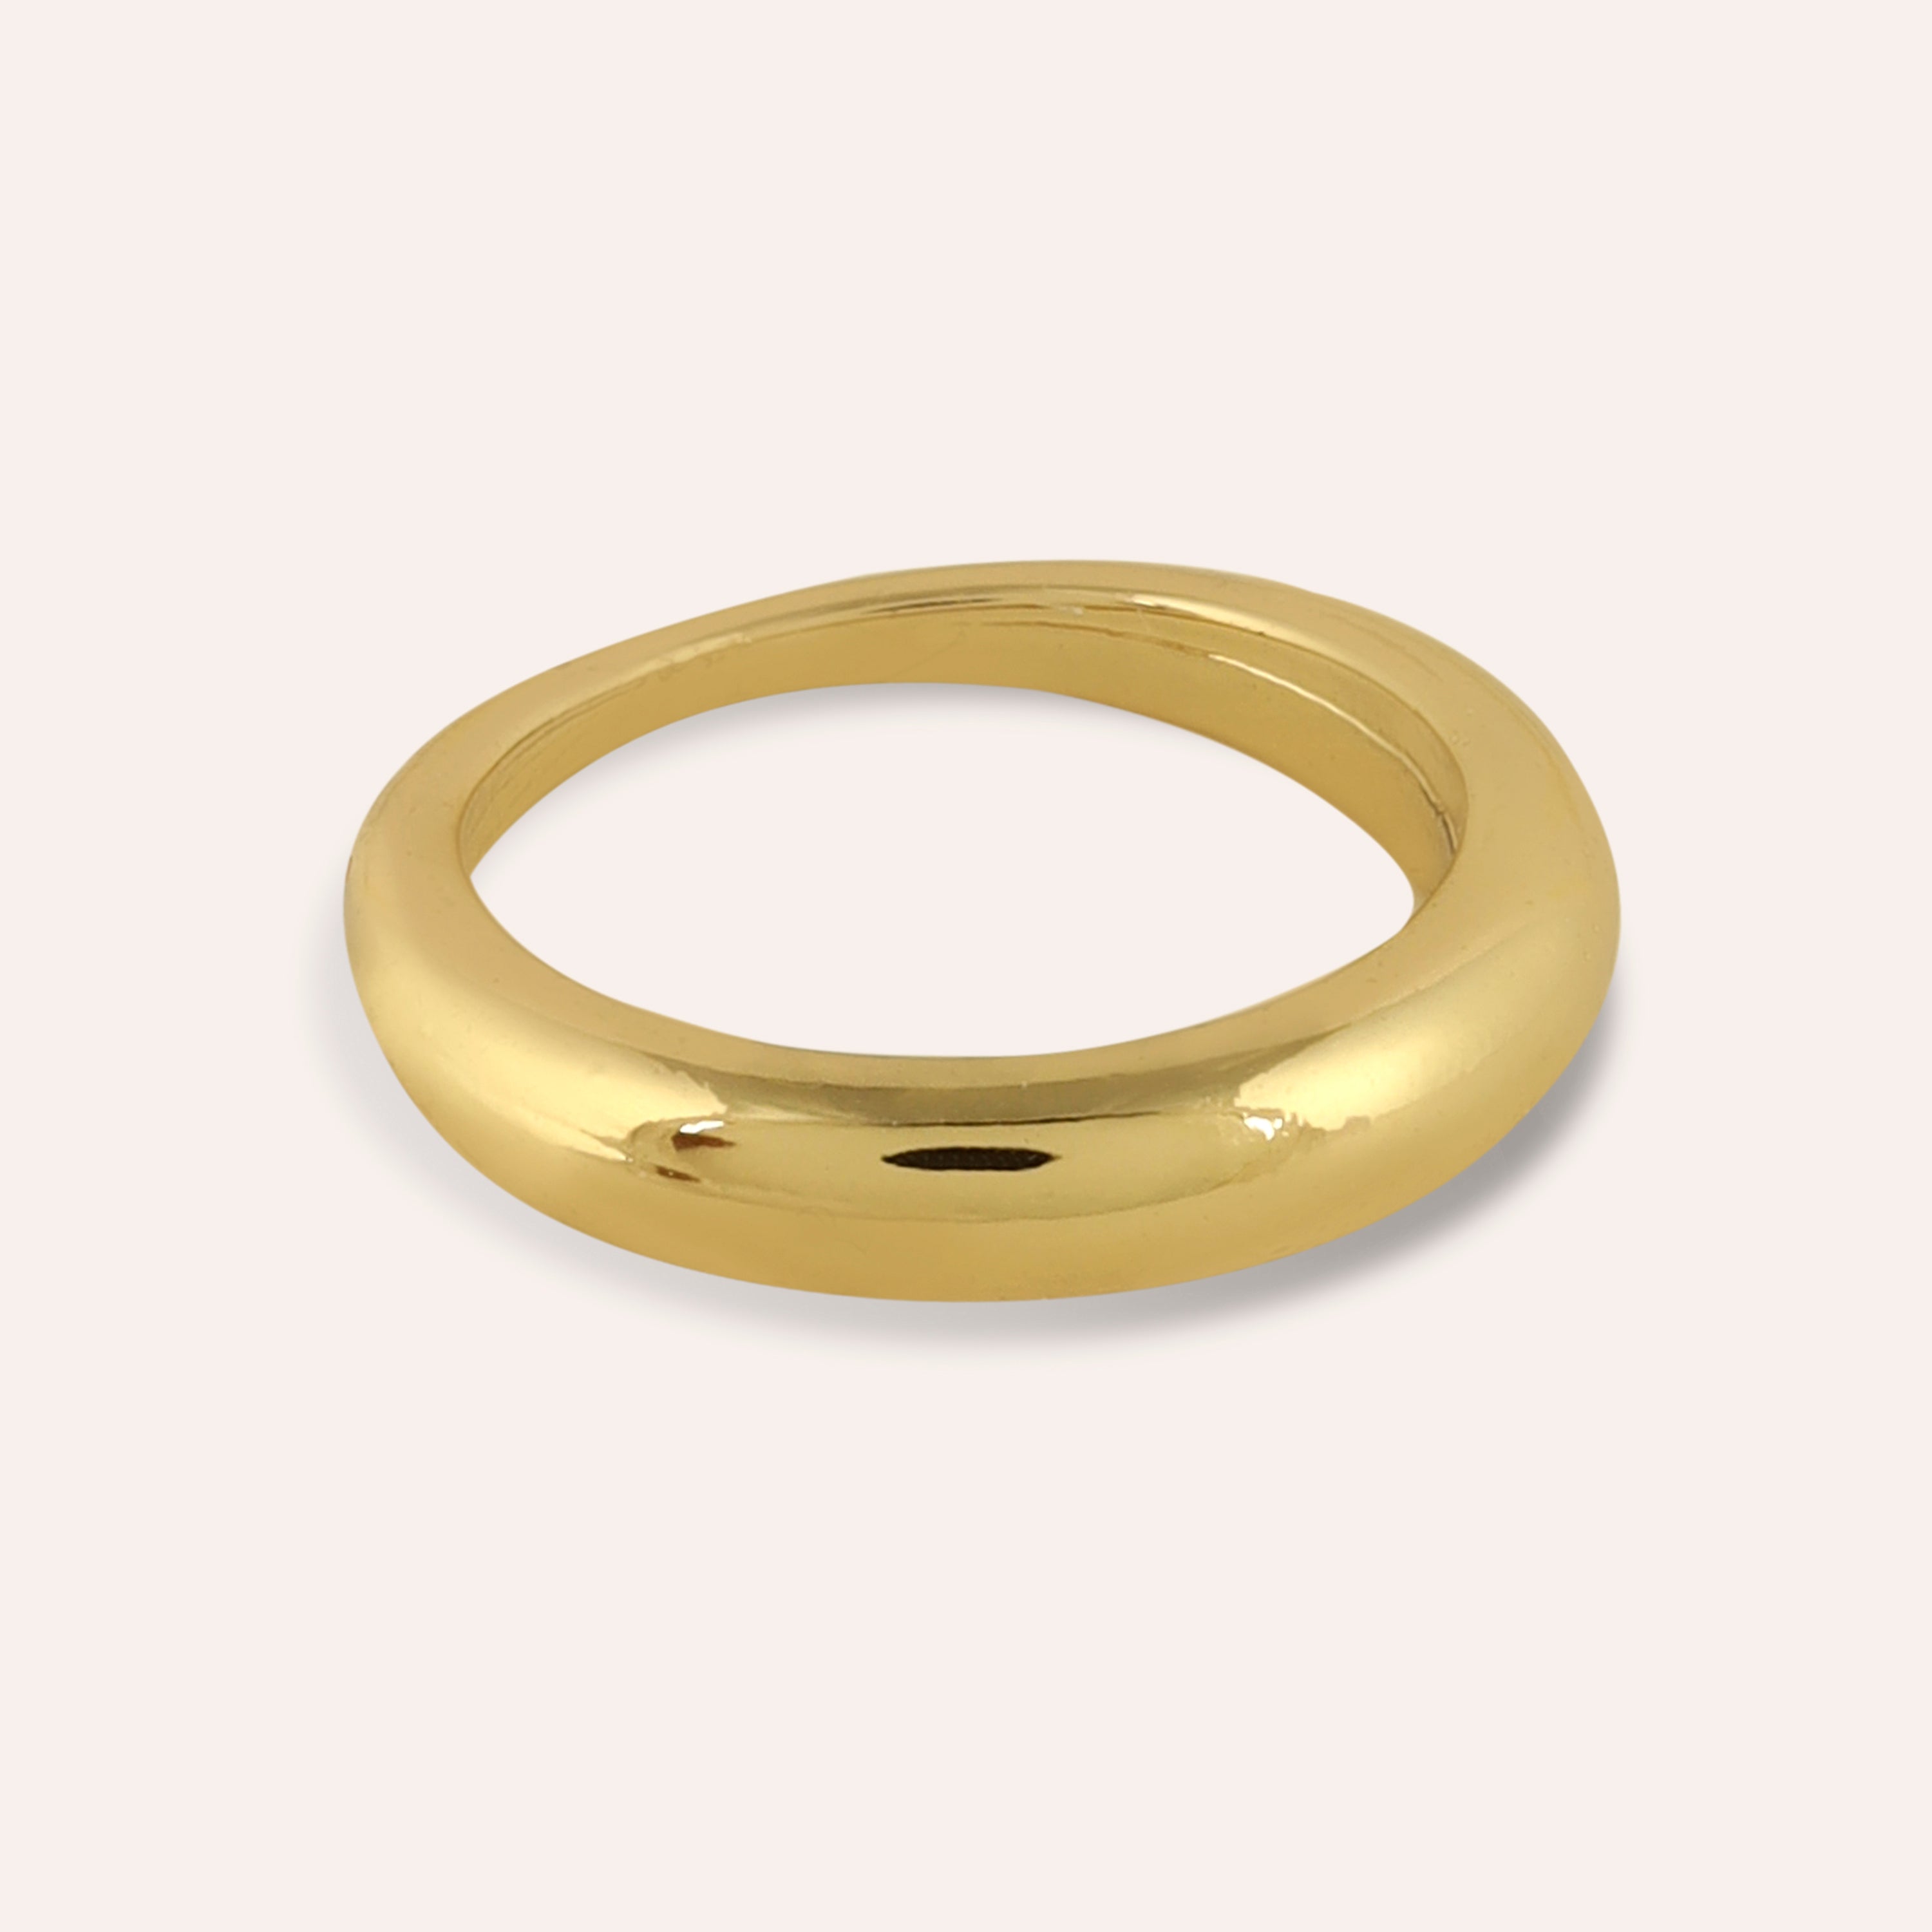 TFC Glimmer Glow Gold Plated Ring- Elevate your style with our exquisite collection of gold-plated adjustable rings for women, including timeless signet rings. Explore cheapest fashion jewellery designs with anti-tarnish properties, all at The Fun Company with a touch of elegance